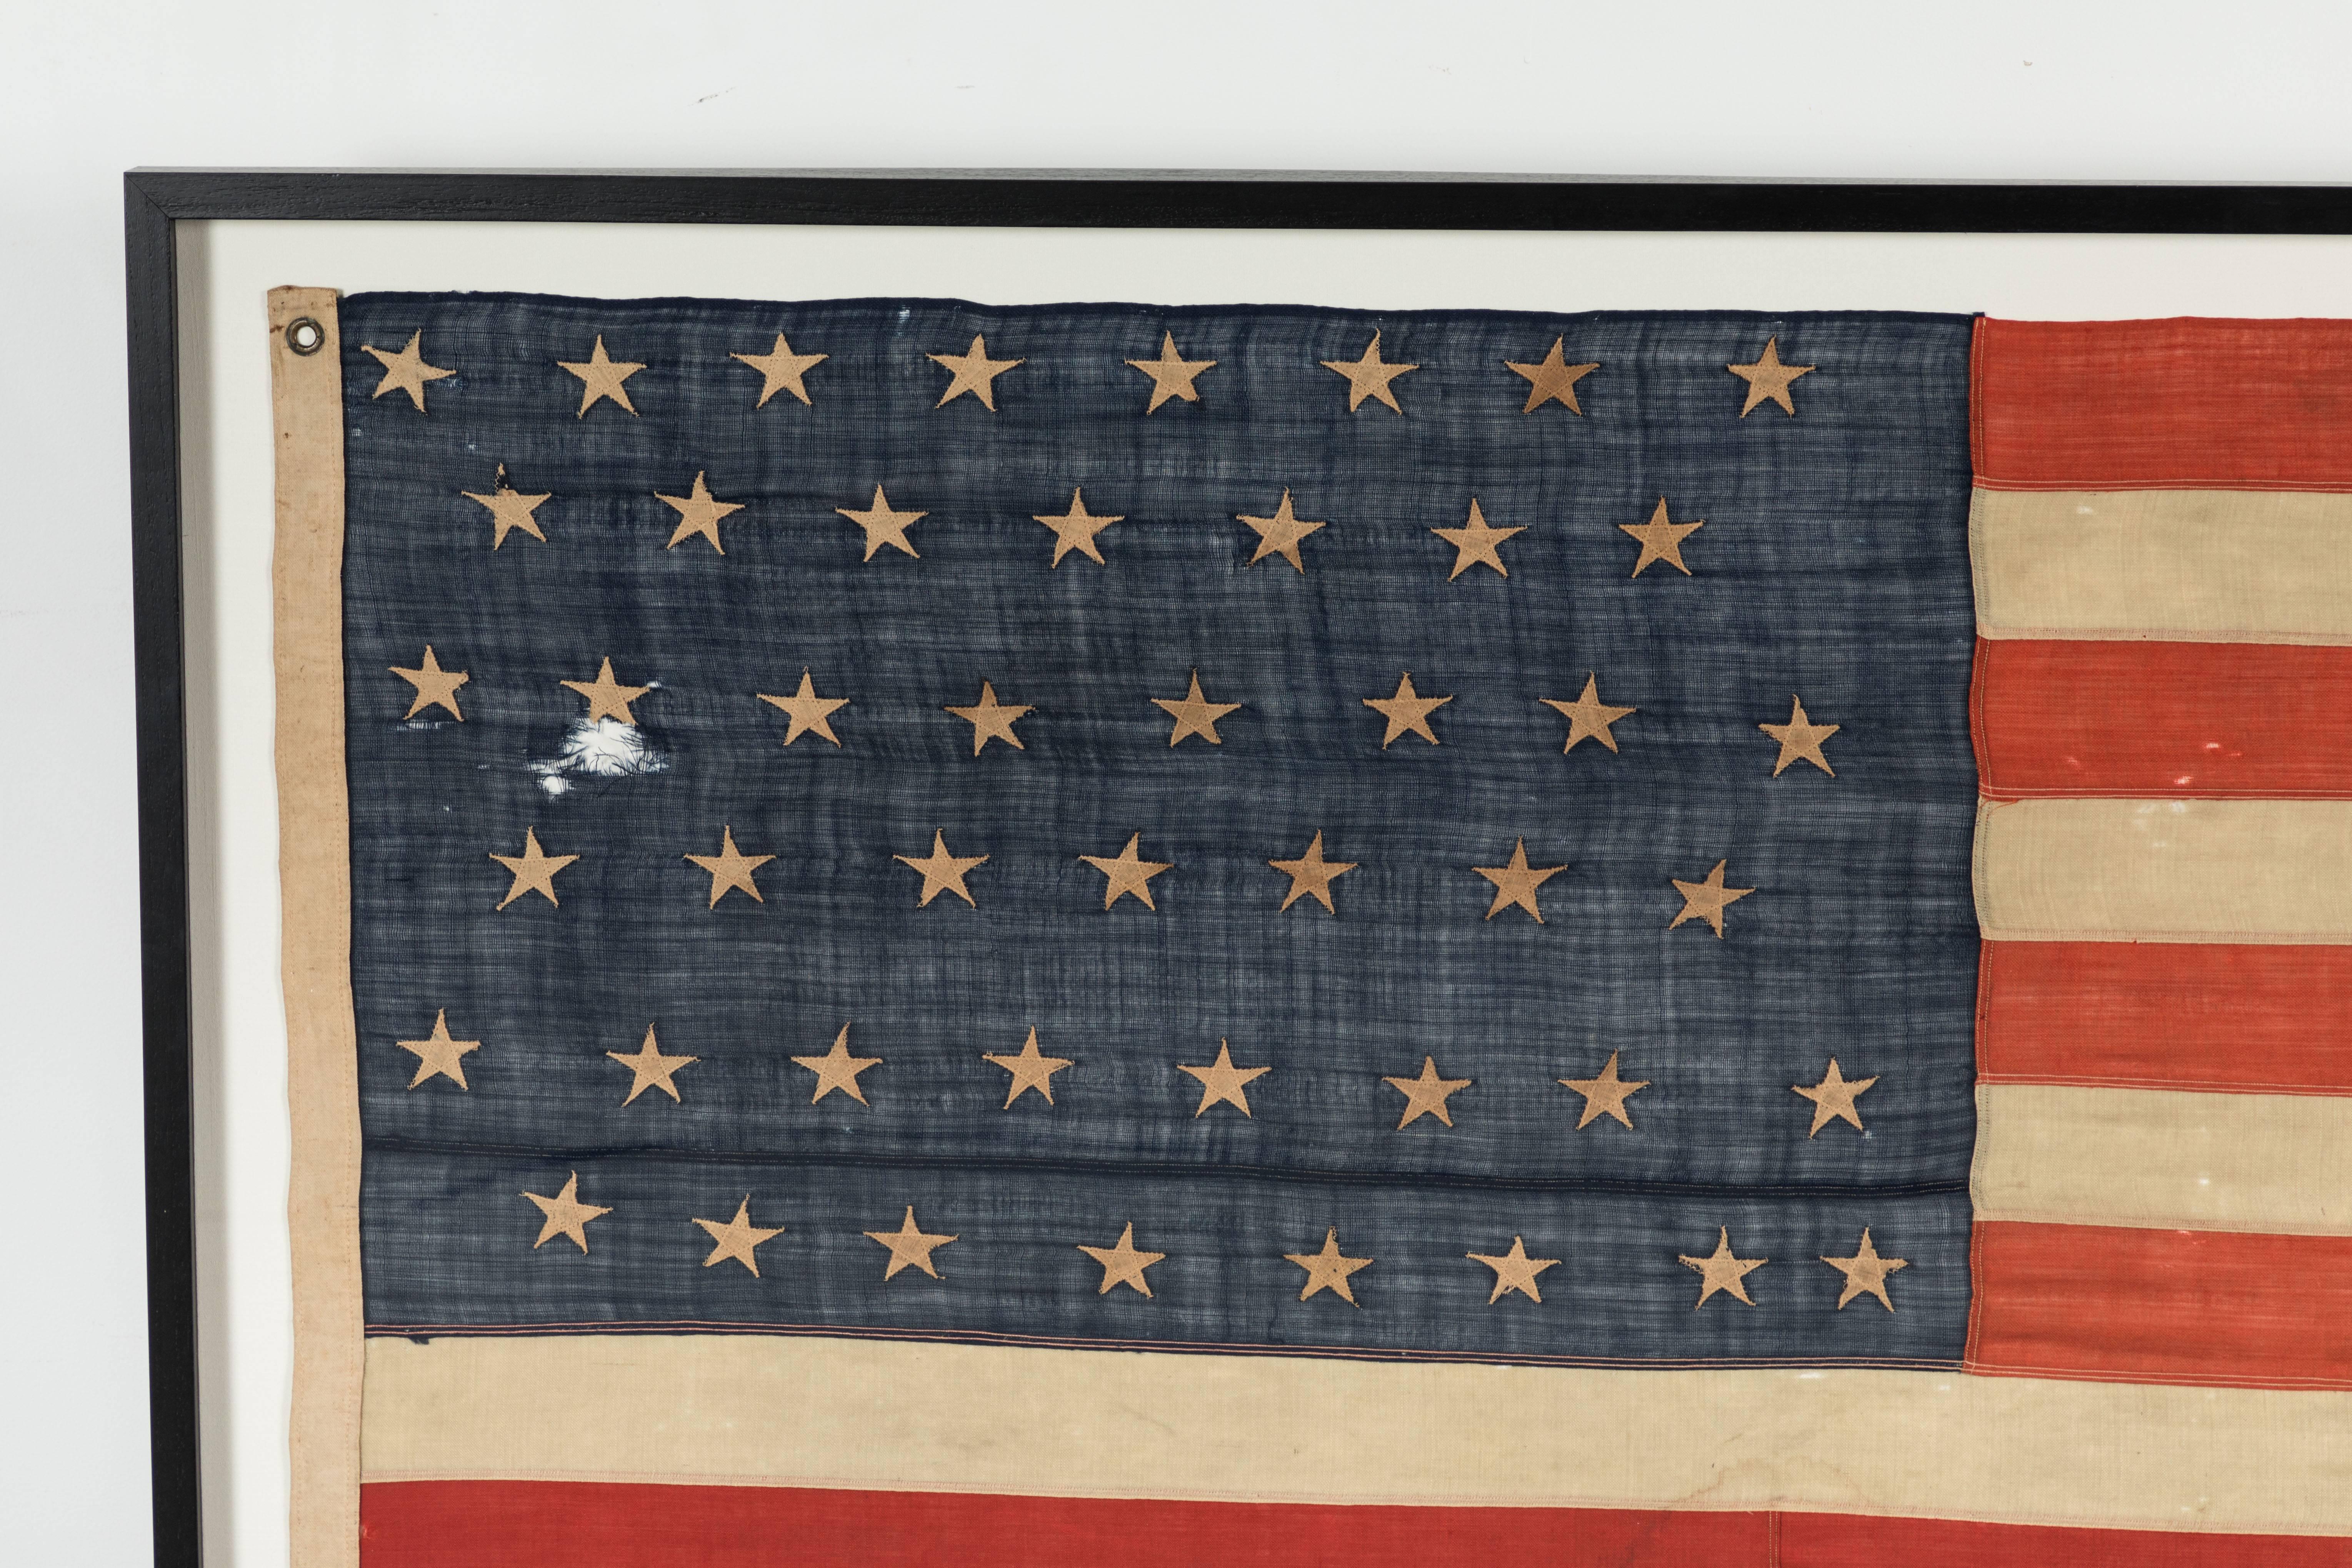 Nice large scale framed American 46 star flag. Hand-stitched and randomly applied folk art stars. The rest of the flag construction is machine stitched. Exact measurements are 86.5 wide by 46